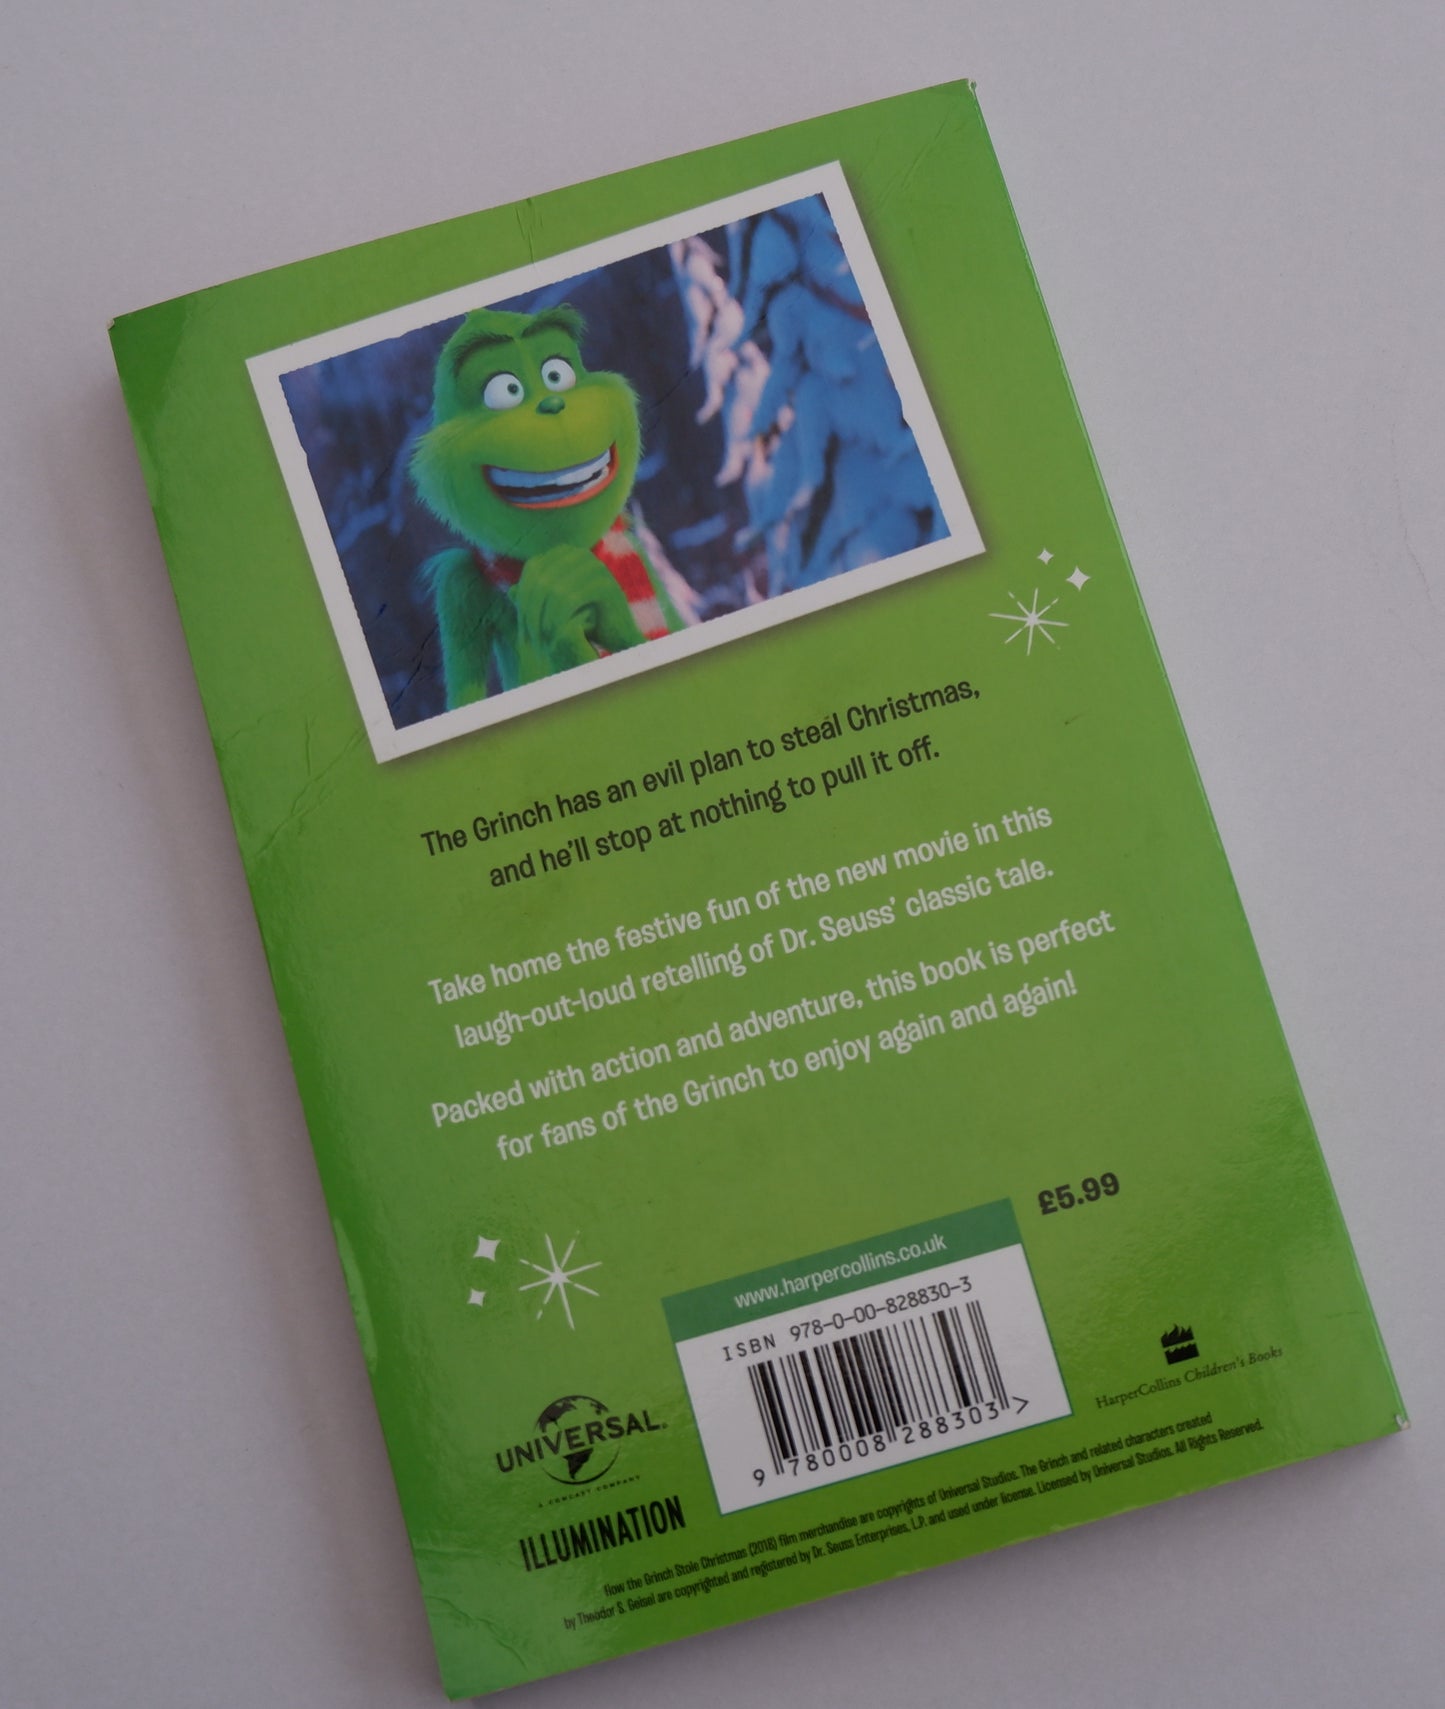 The Grinch: The Story of the Movie: Movie Tie-in